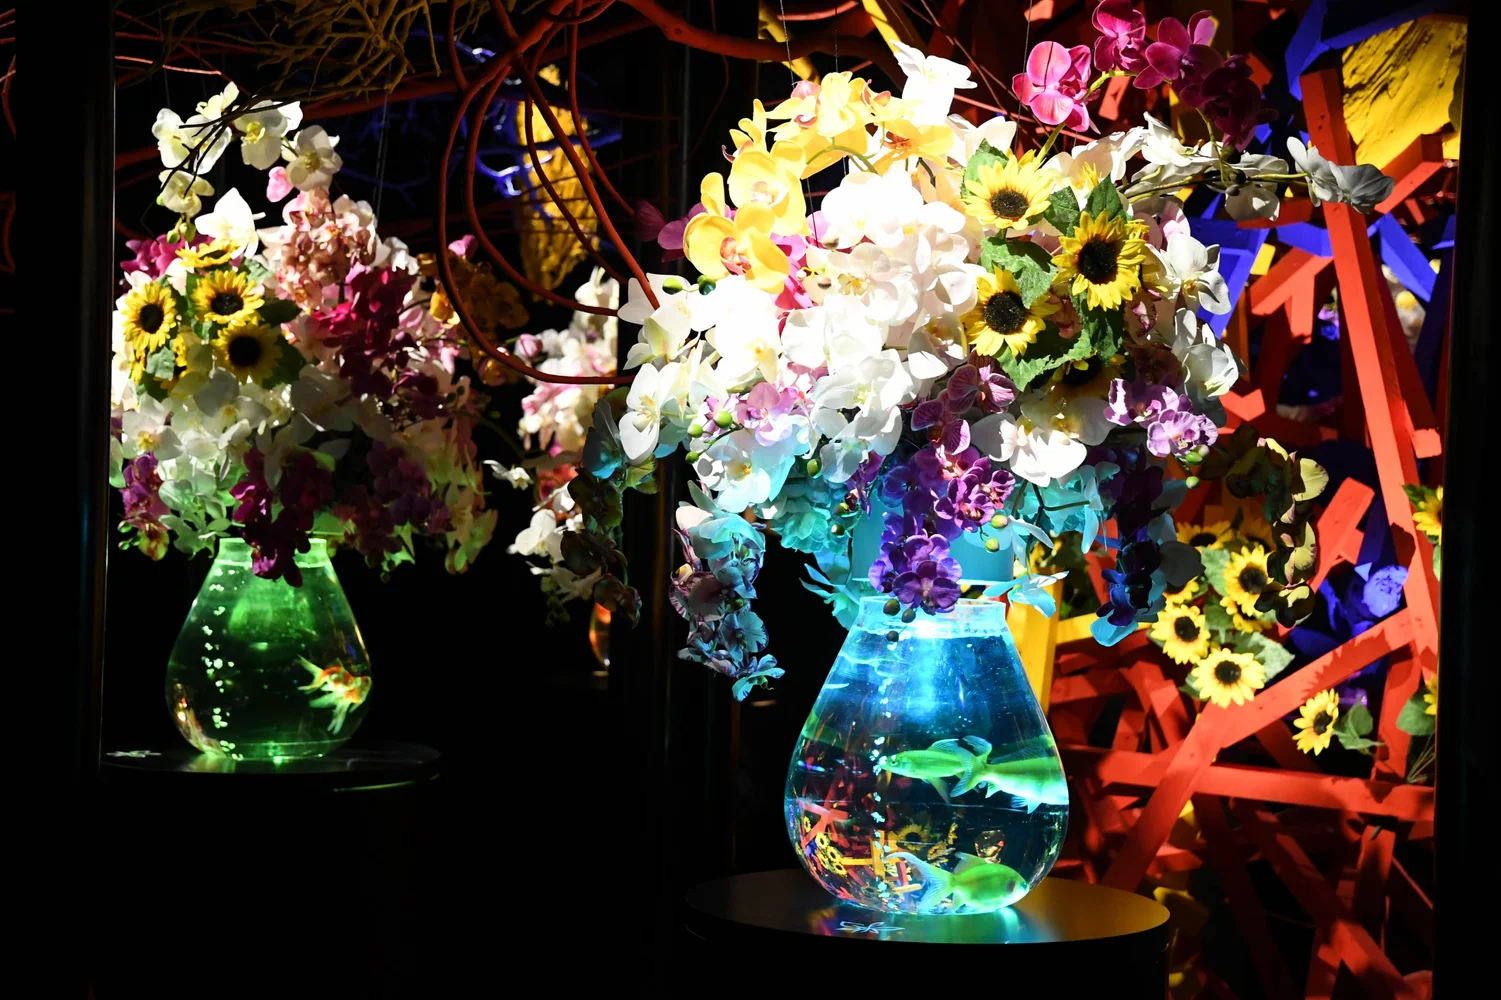 The floral arrangements called "Flowerium" is made by florist Shogo Kariyazaki and change with the seasons.